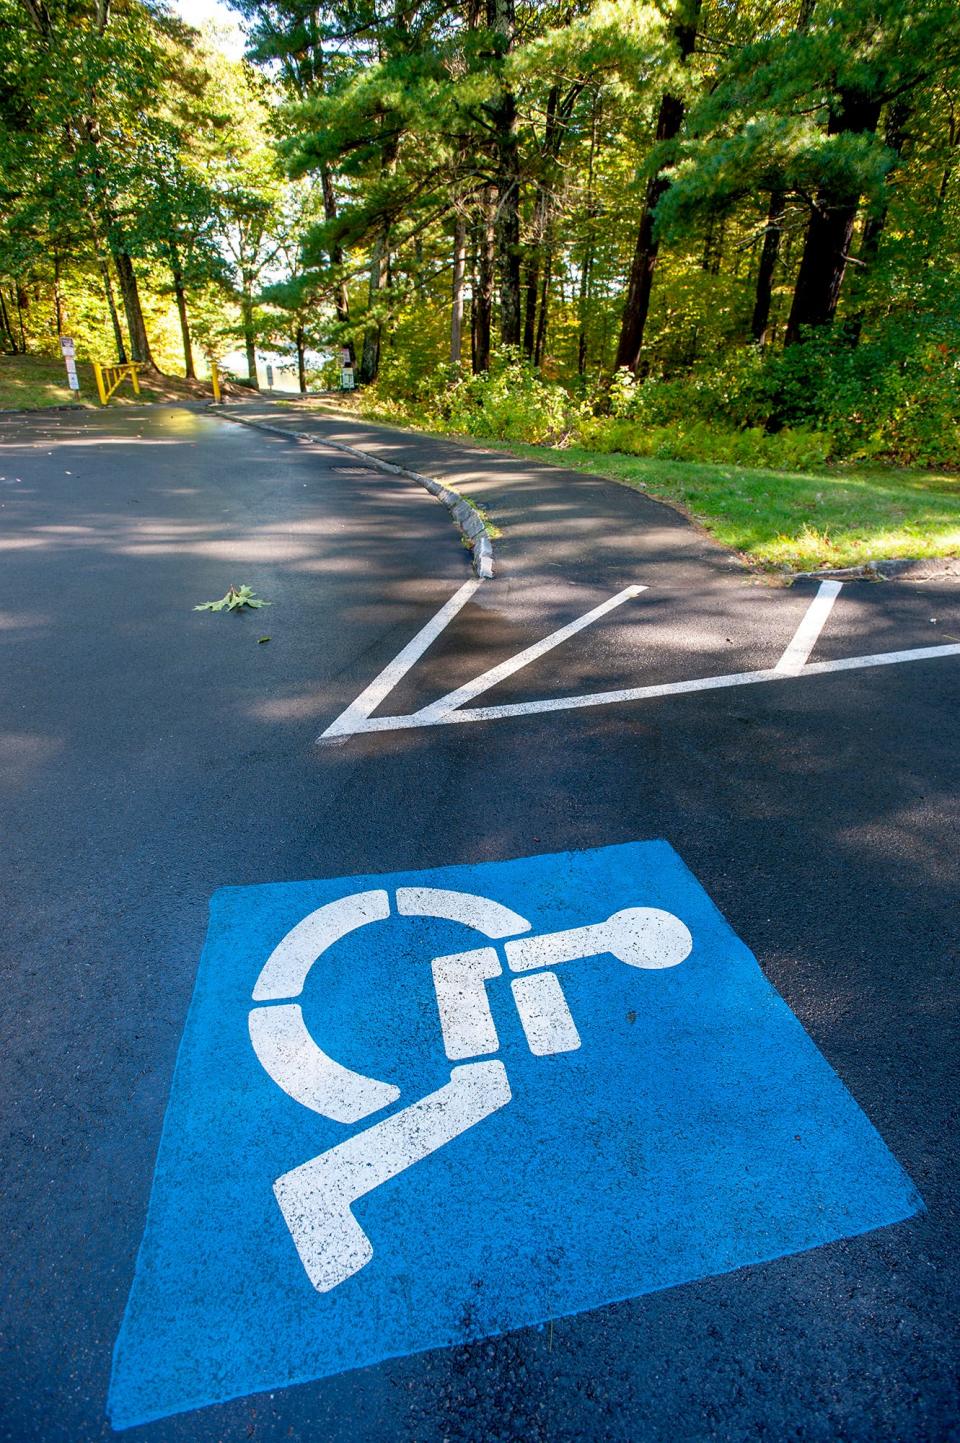 Handicapped parking and handicap accessible pathway.